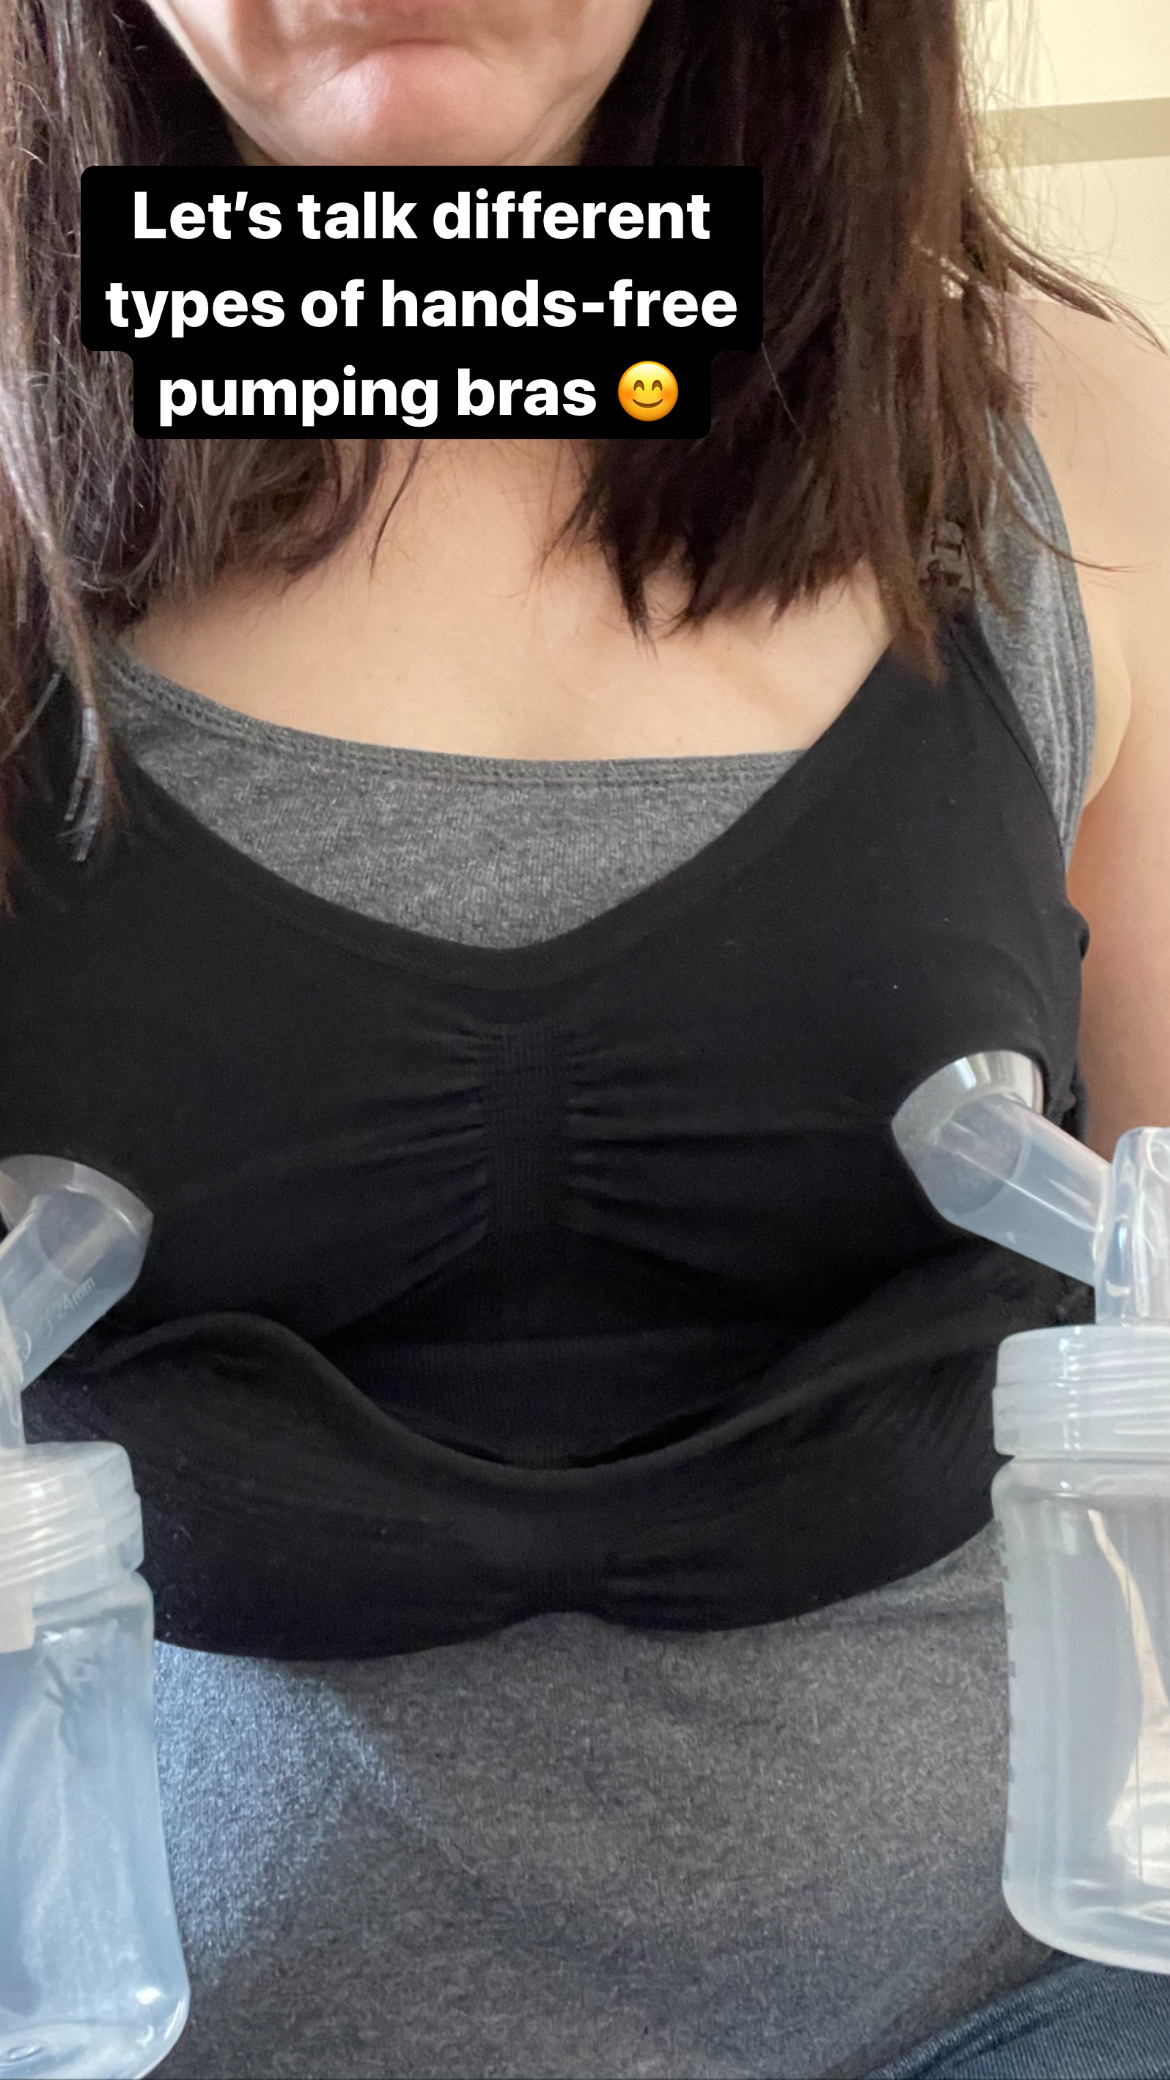 Best Breast Pumping Accessories - Exclusive Pumping